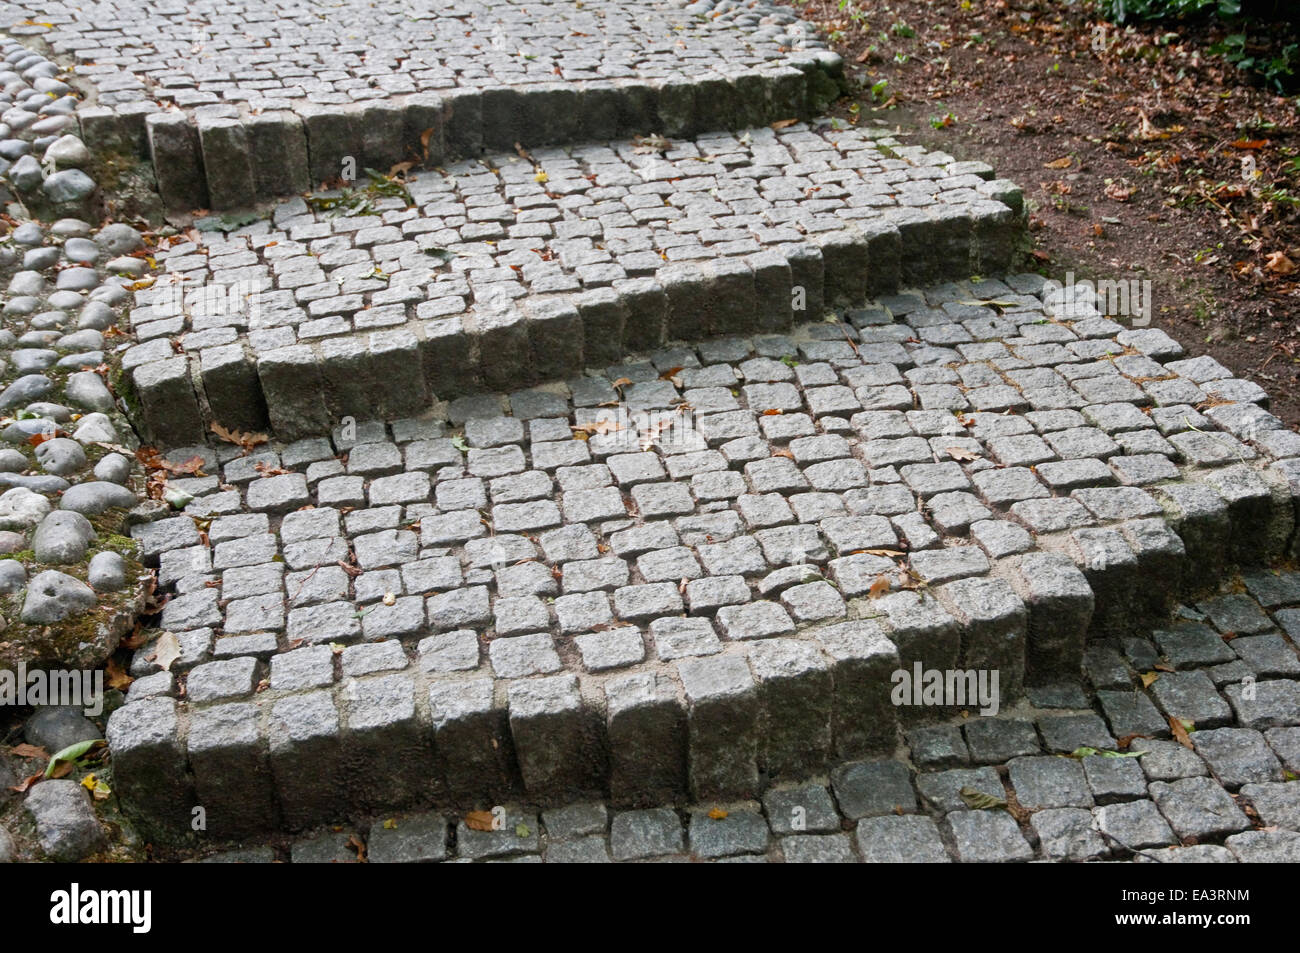 Granite sett steps, part of the path leading to the John F Kennedy Memorial at Runnymede, UK. Stock Photo